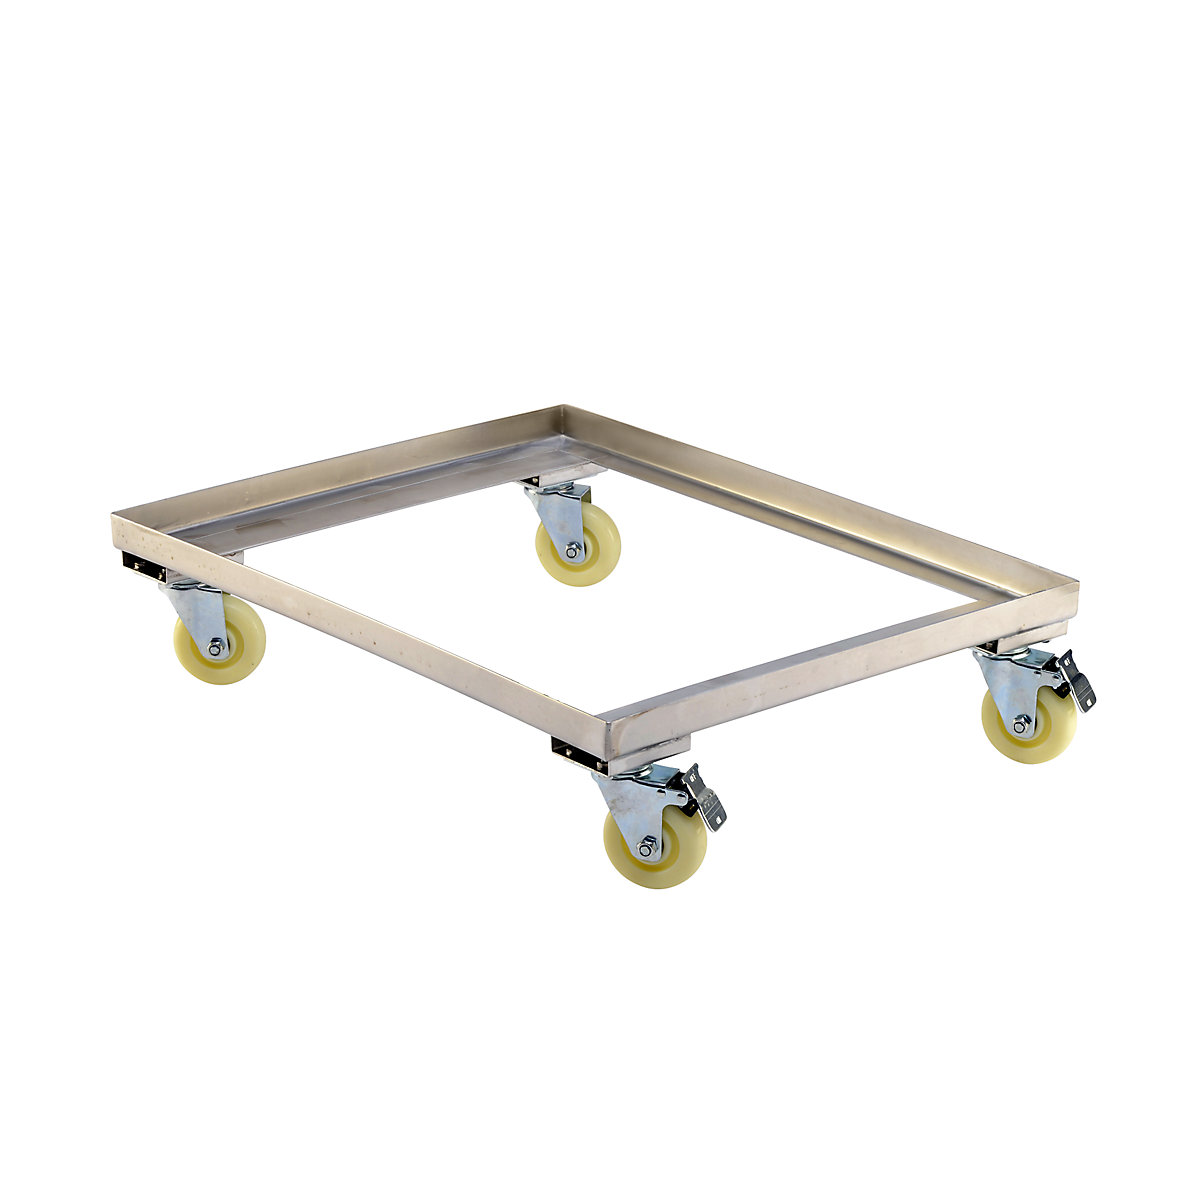 Stainless steel dolly, max. load 150 kg, LxW 810 x 610 mm, 5+ items-4